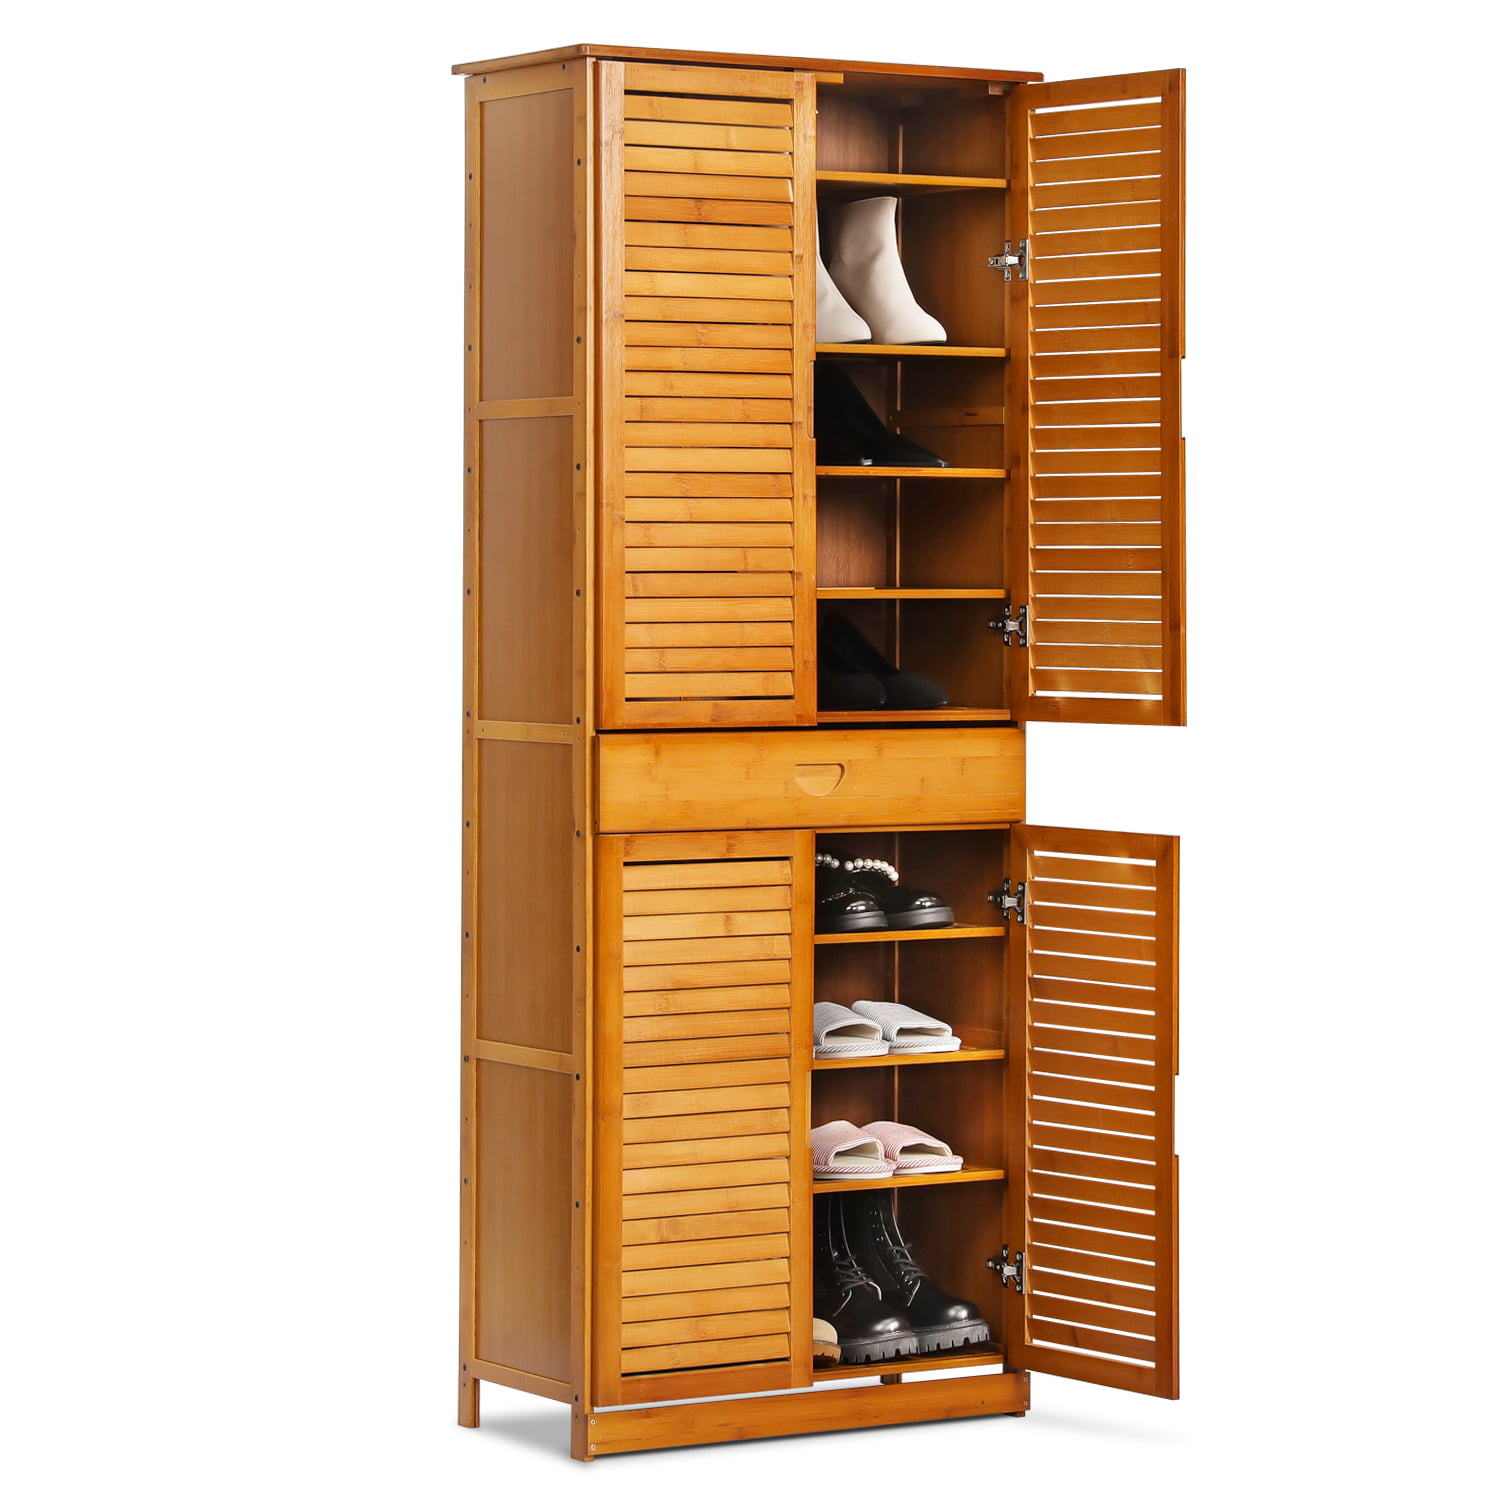 Details about   White Wooden Cabinet with 1 Basket Weave Drawer and 1 Door Bottom Storage 